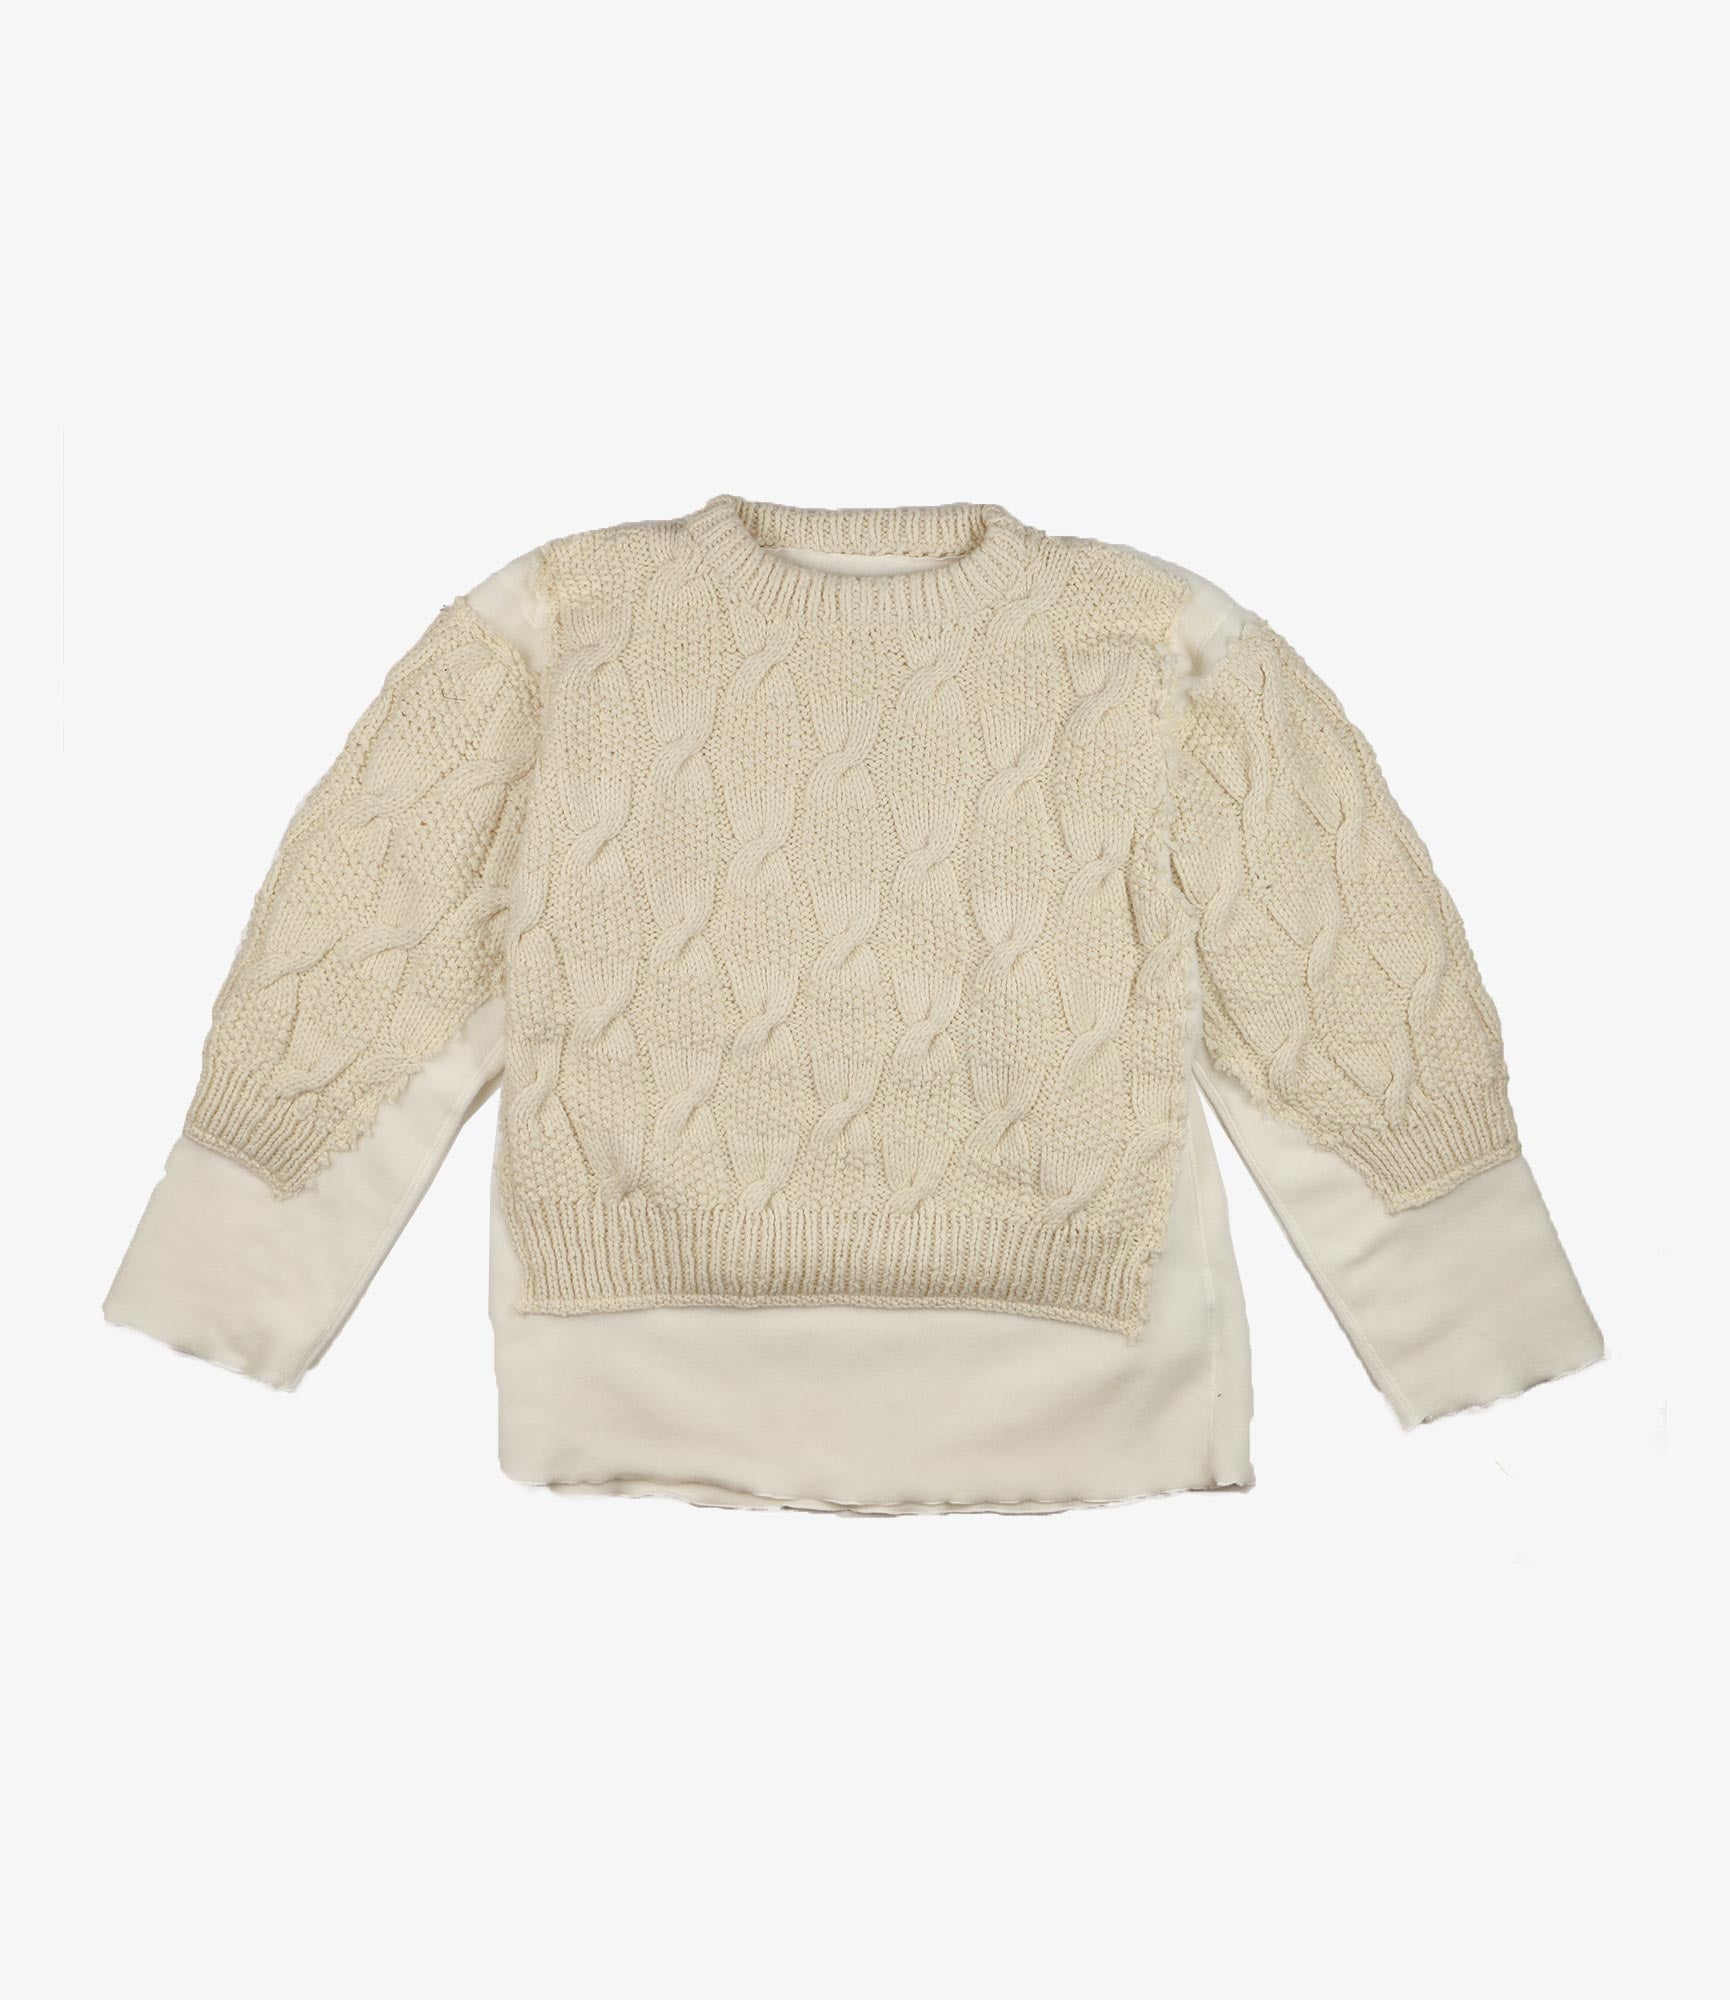 Rebuild by Needles Fisherman Sweater - Off White